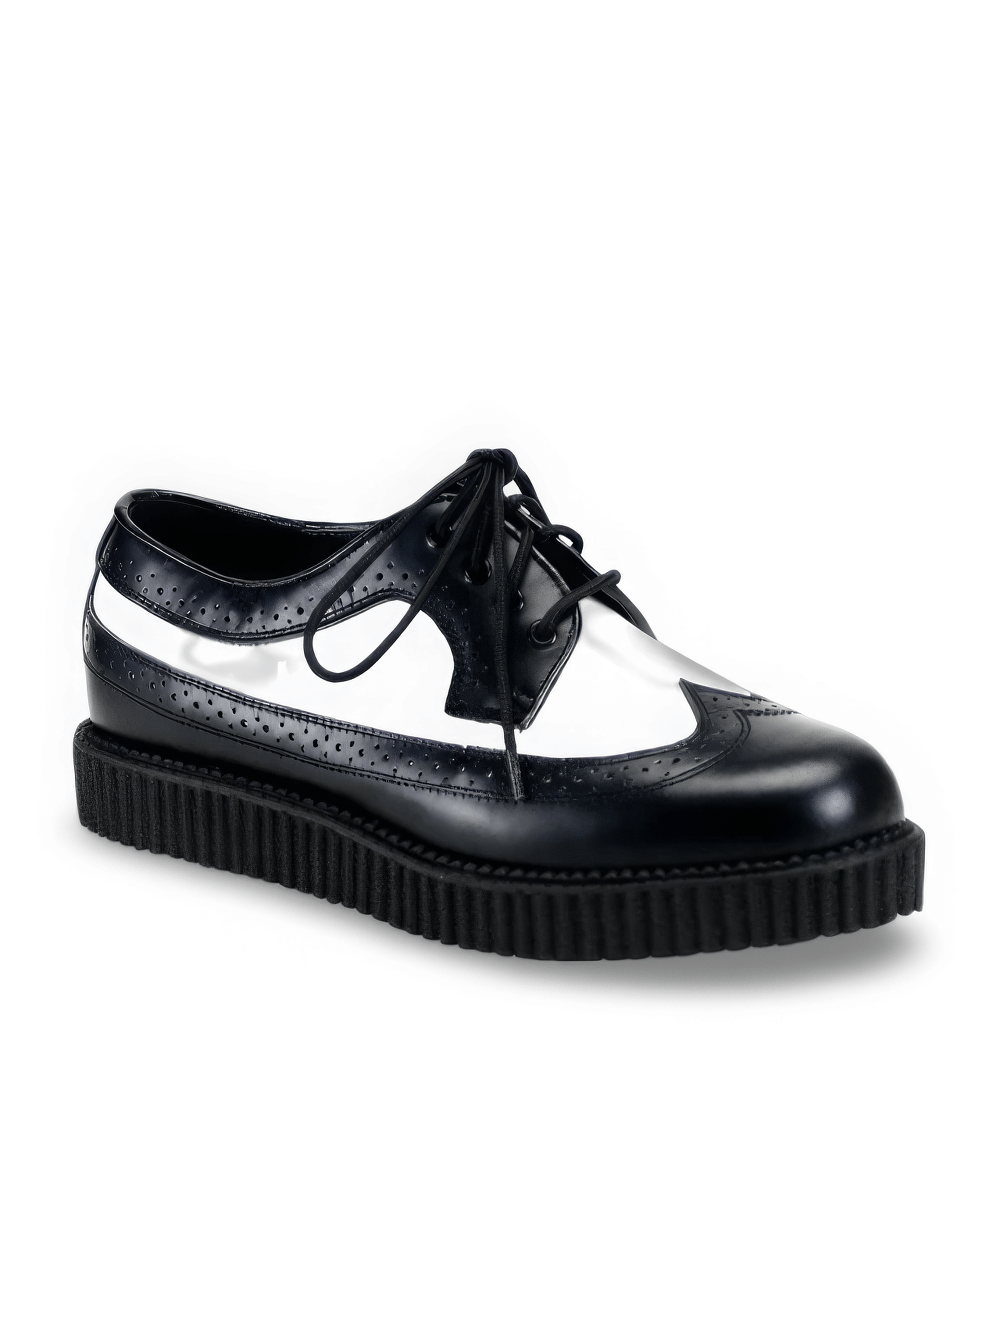 DEMONIA Black and White Rockabilly Punk Creepers